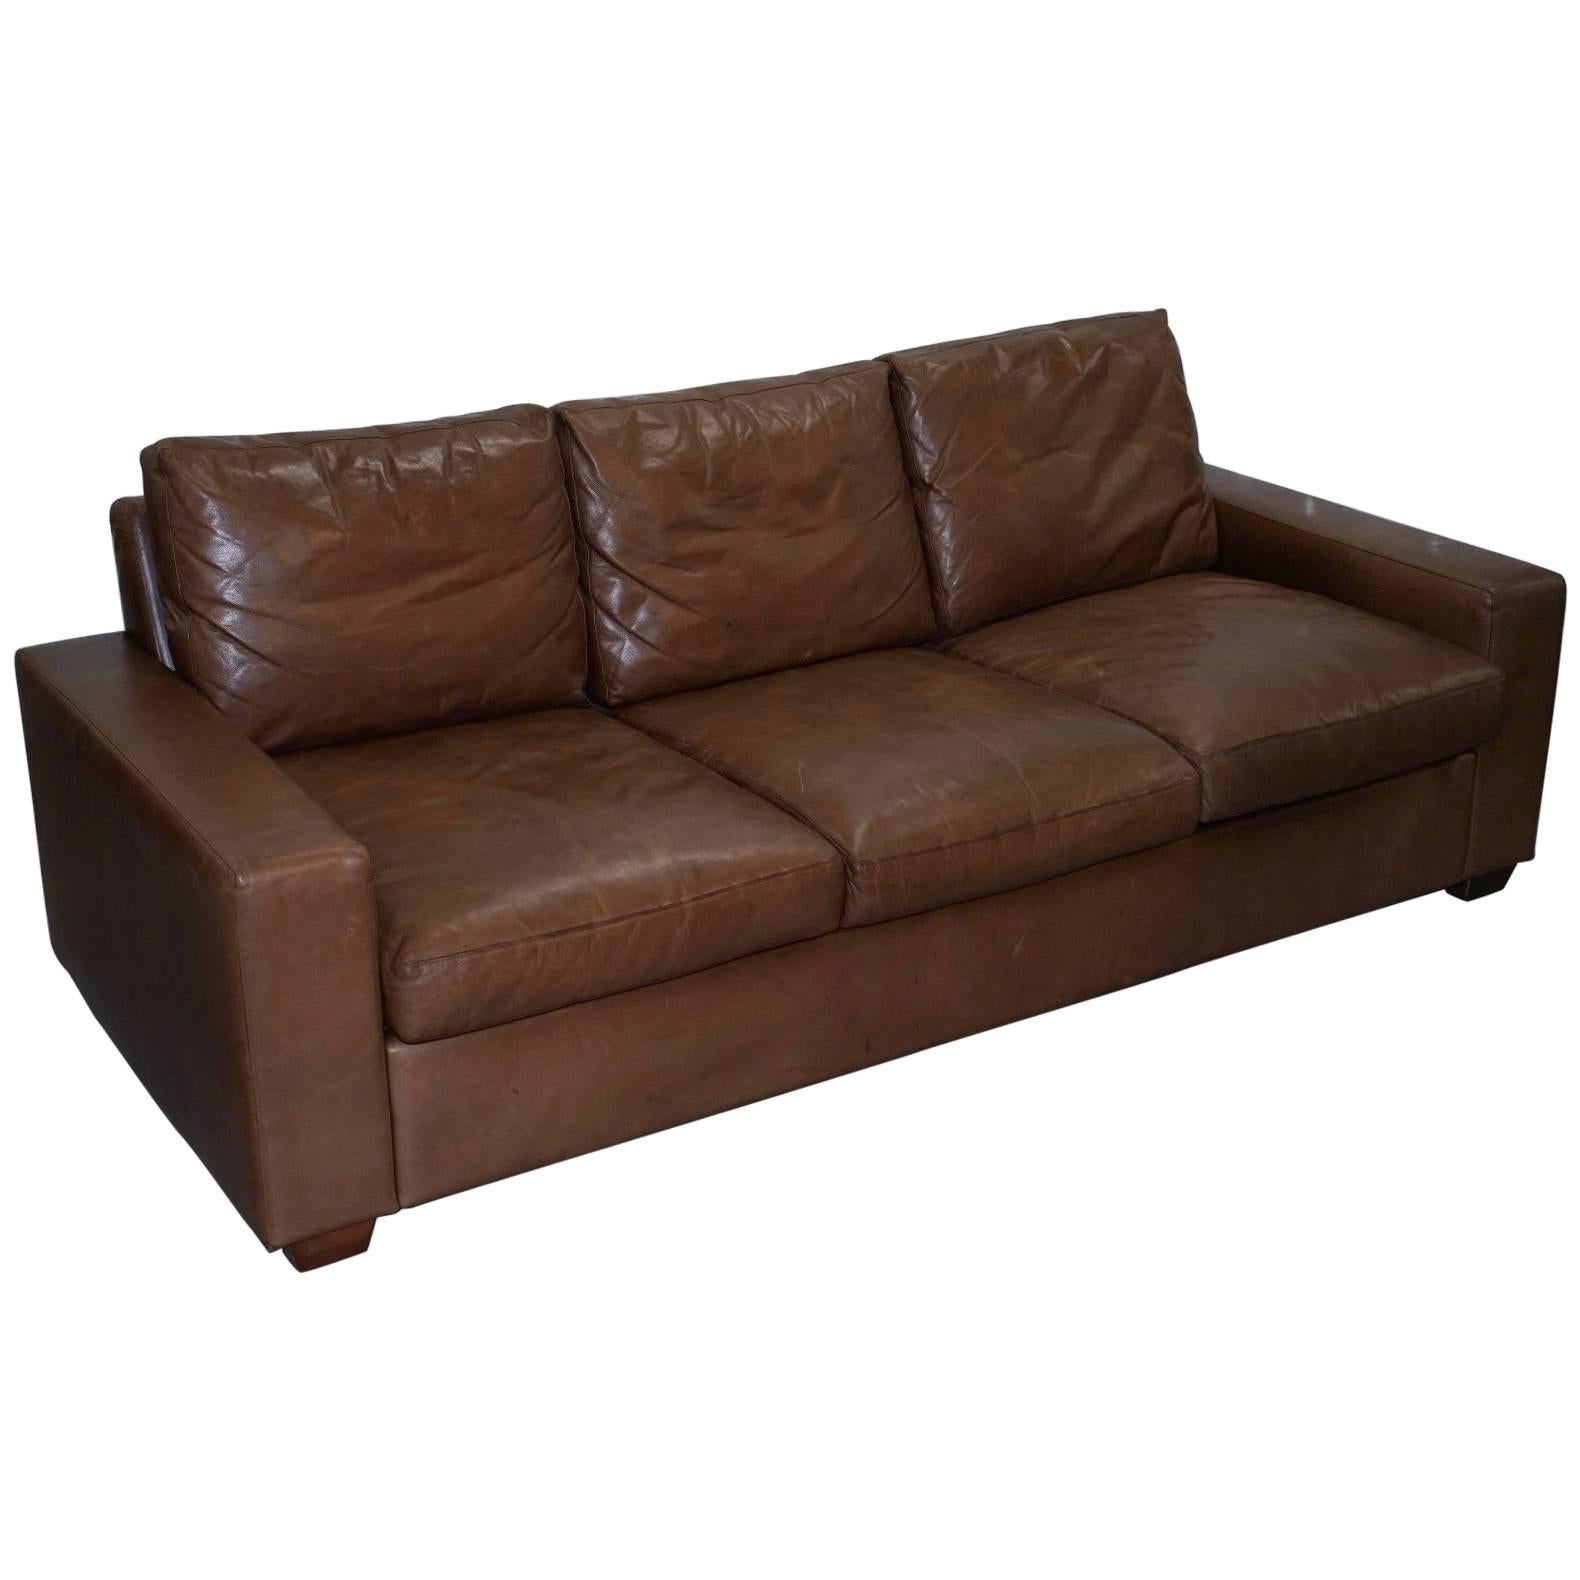 Four-Seater Fully Aniline Aged Brown Leather Sofa Bed